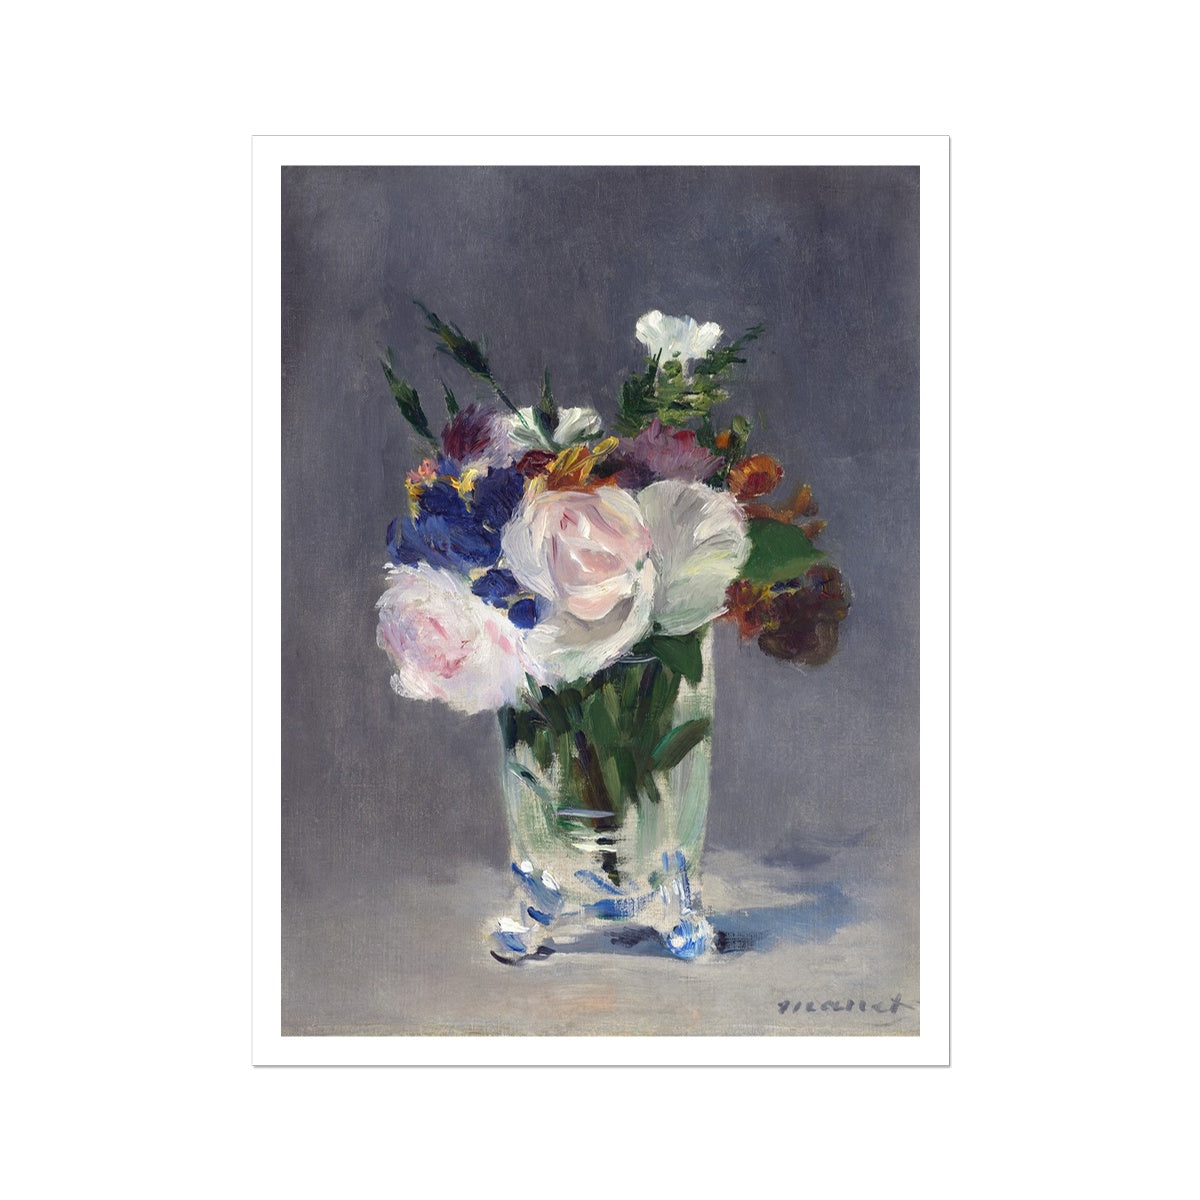 'Flowers in a Crystal Vase' Still Life by Edouard Manet. Open Edition Fine Art Print. Historic Art